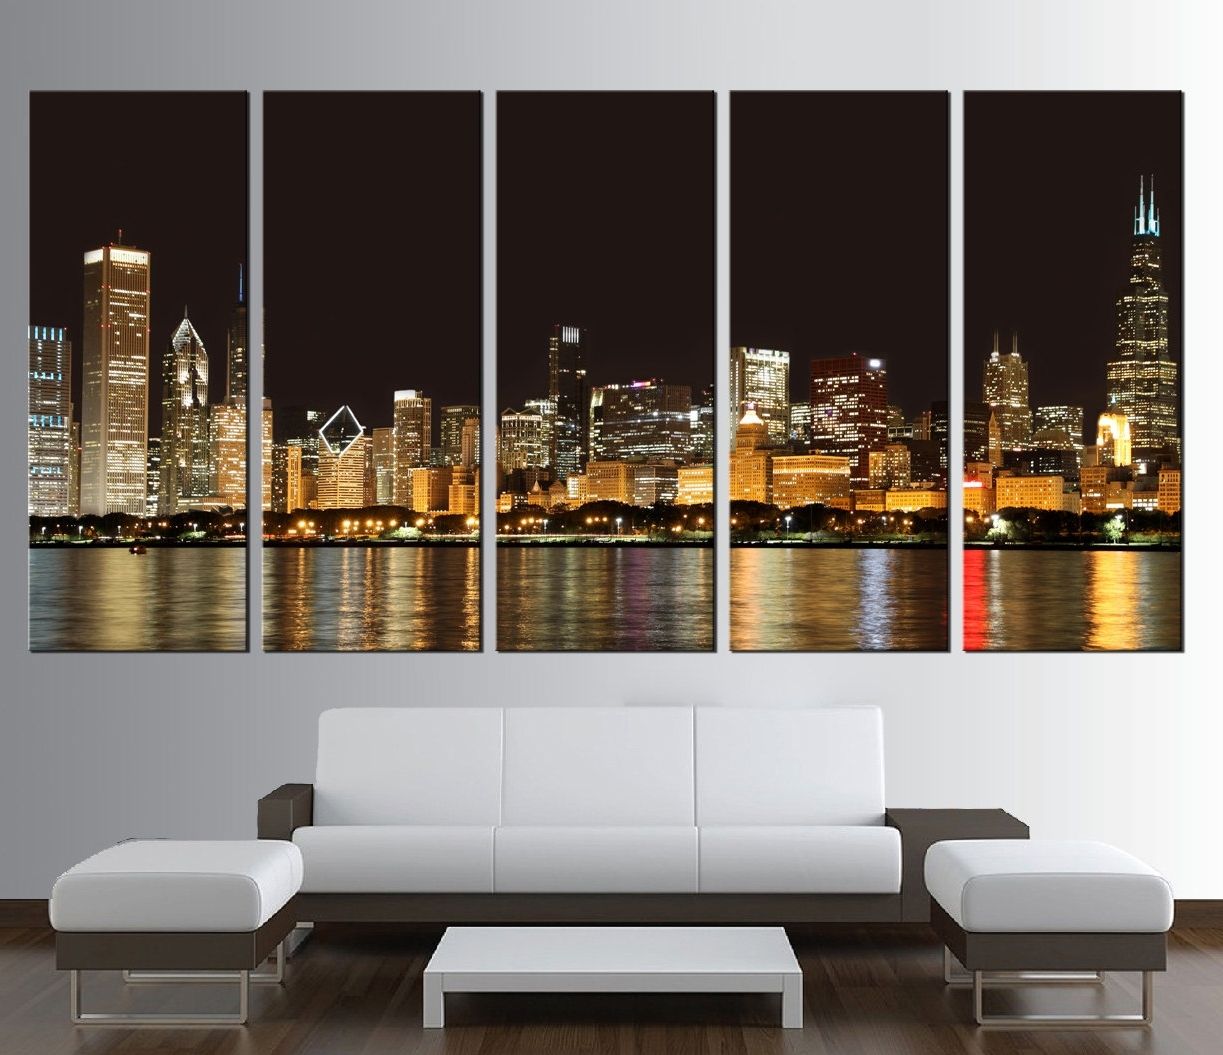 Decor: Beautiful Large Canvas Wall Art For Oversized Canvas Prints With Regard To Most Recent Big Canvas Wall Art (View 14 of 15)